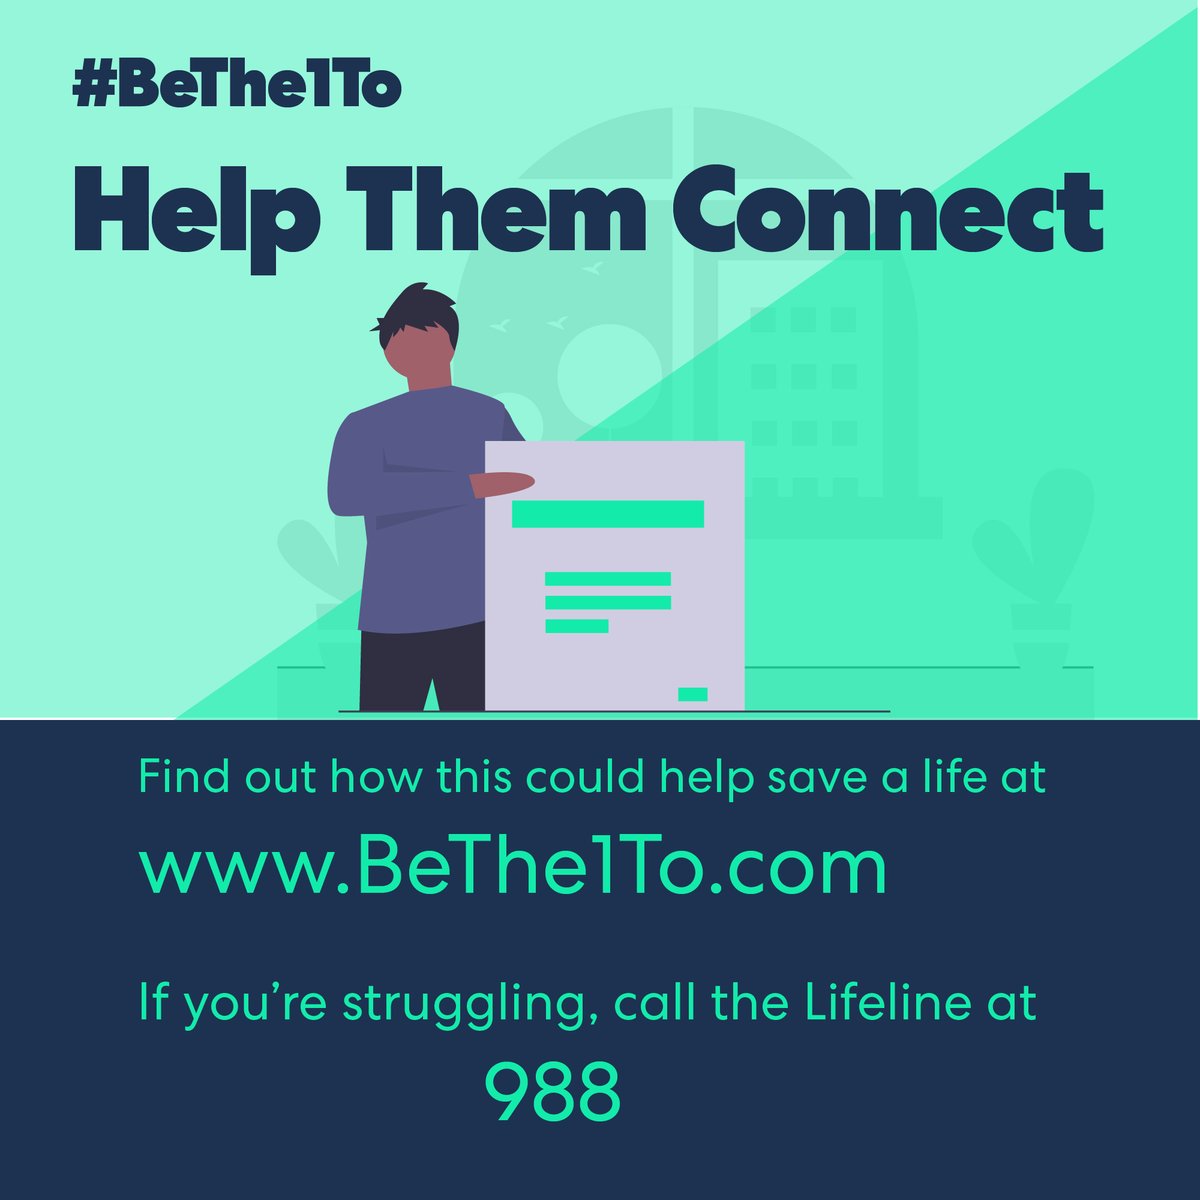 One way to help someone struggling with thoughts of suicide or self-harm connect is developing a safety network that includes community mental health resources. Visit the SDMS school counseling website for mental health resources in the Knoxville area. #BeThe1To HELP THEM CONNECT